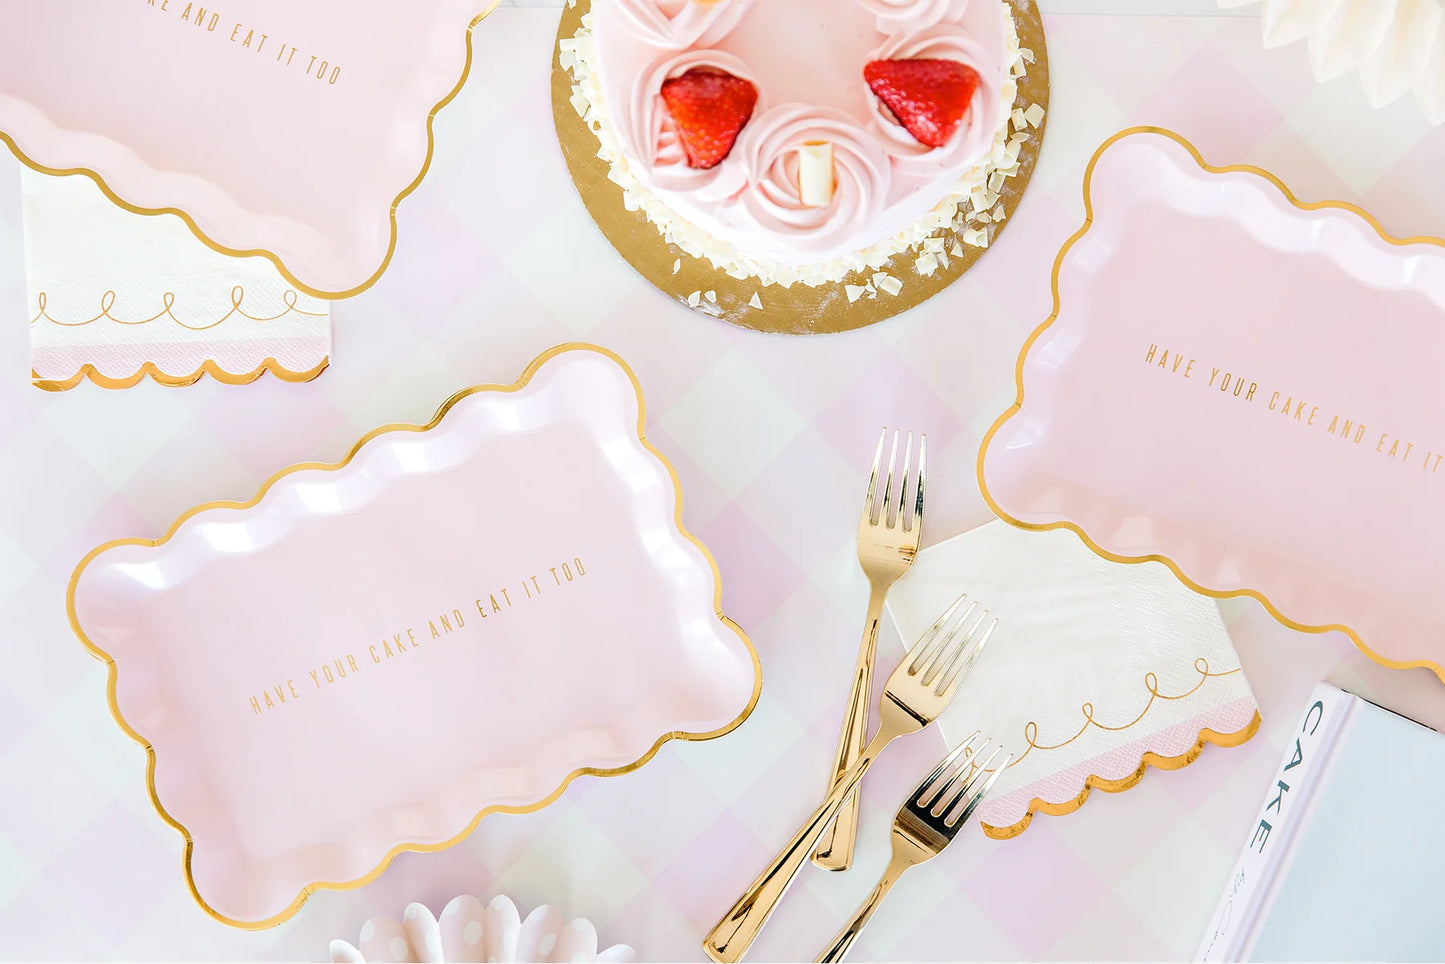 Scalloped Rectangle Plates: Have Your Cake and Eat It Too